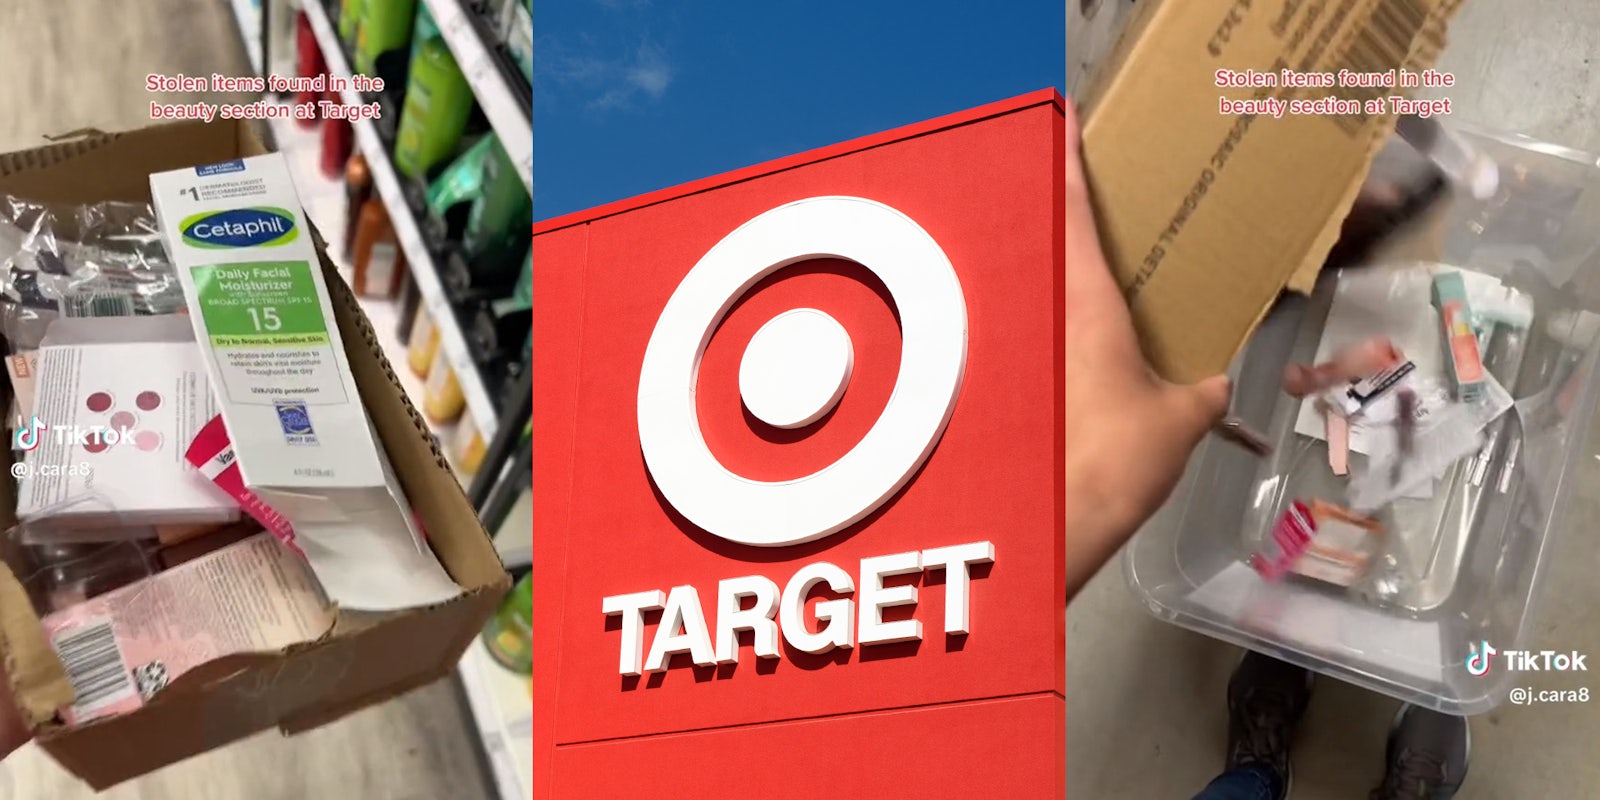 Target worker shares all the items that were stolen in the beauty section that day